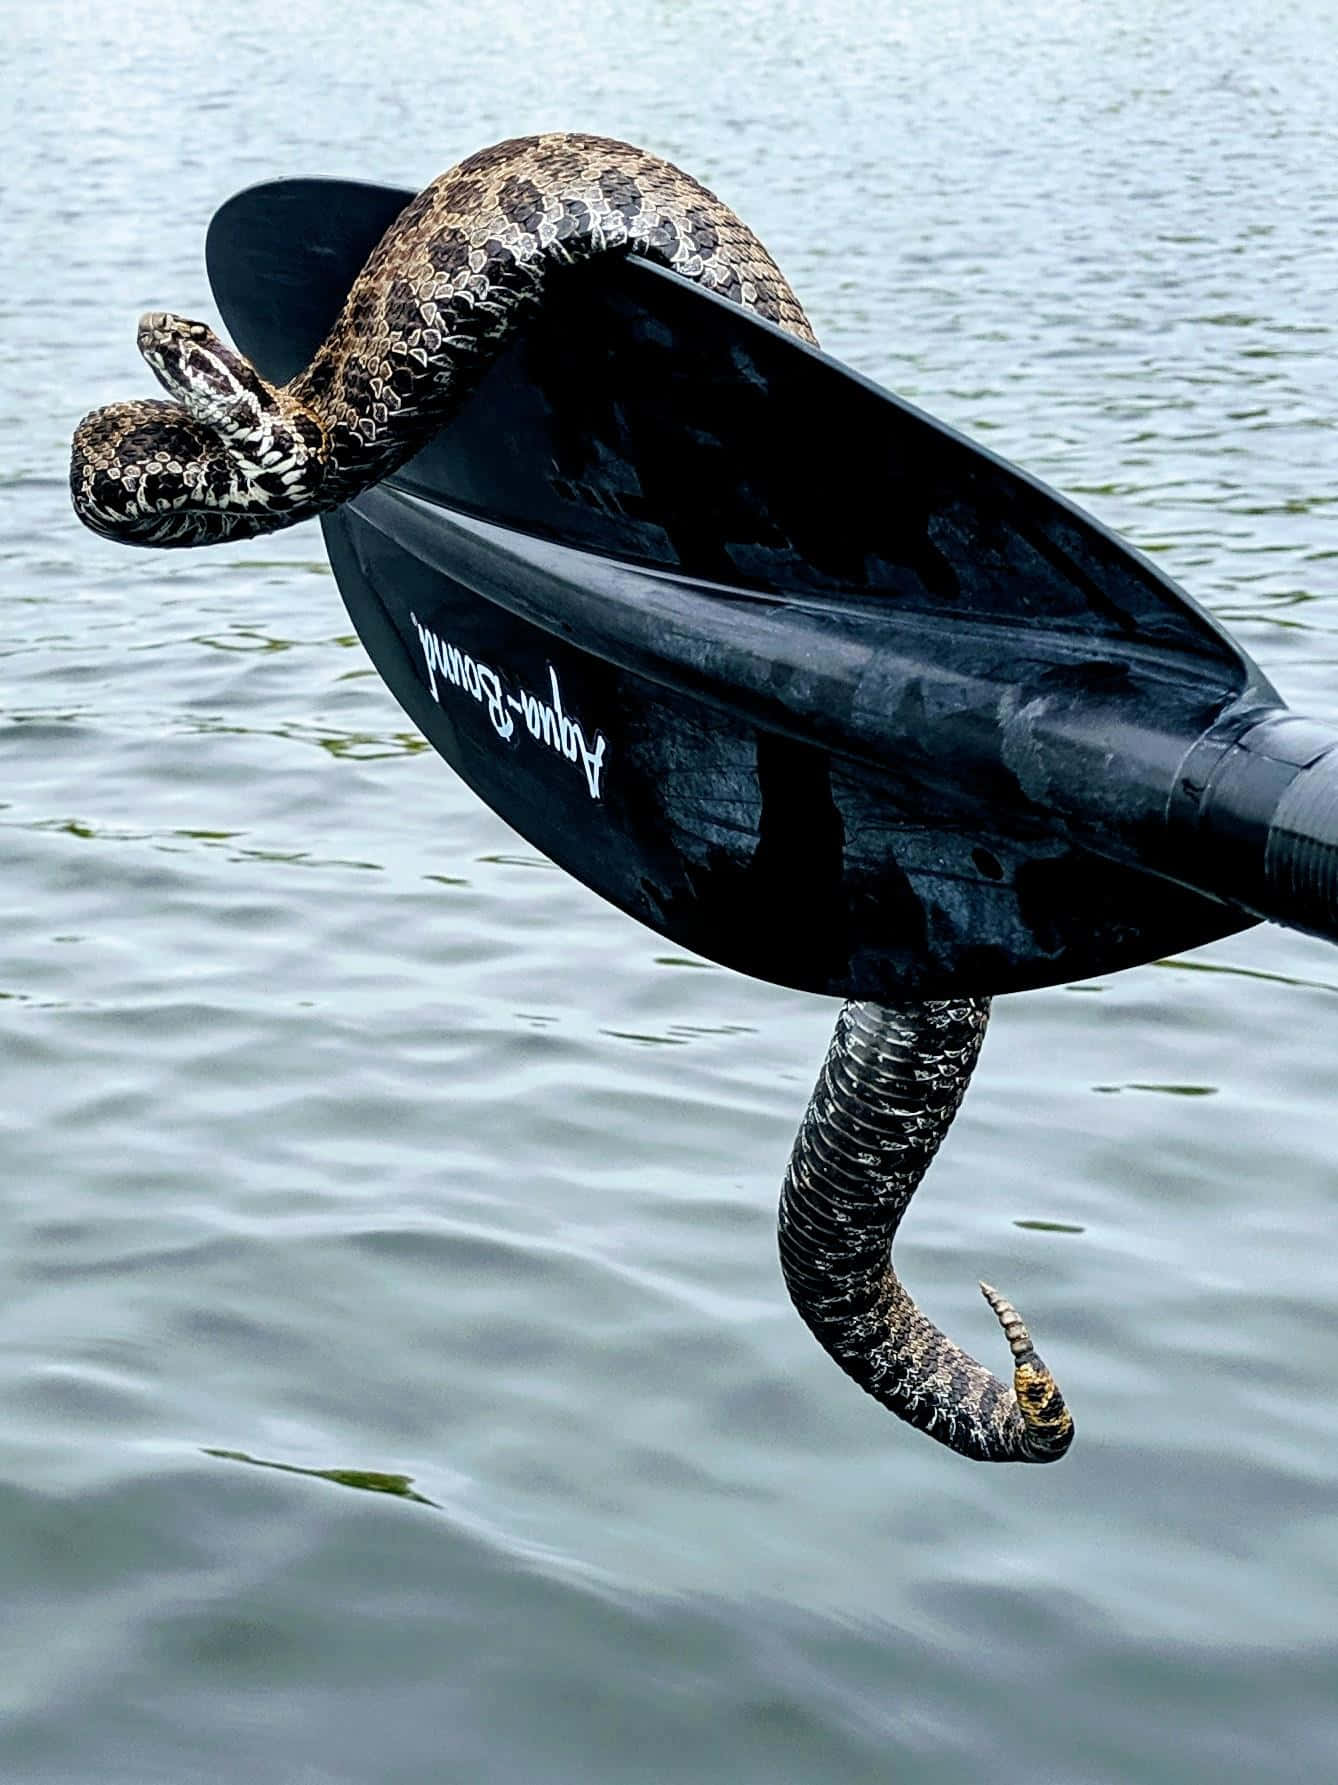 A Snake Is Hanging From A Paddle